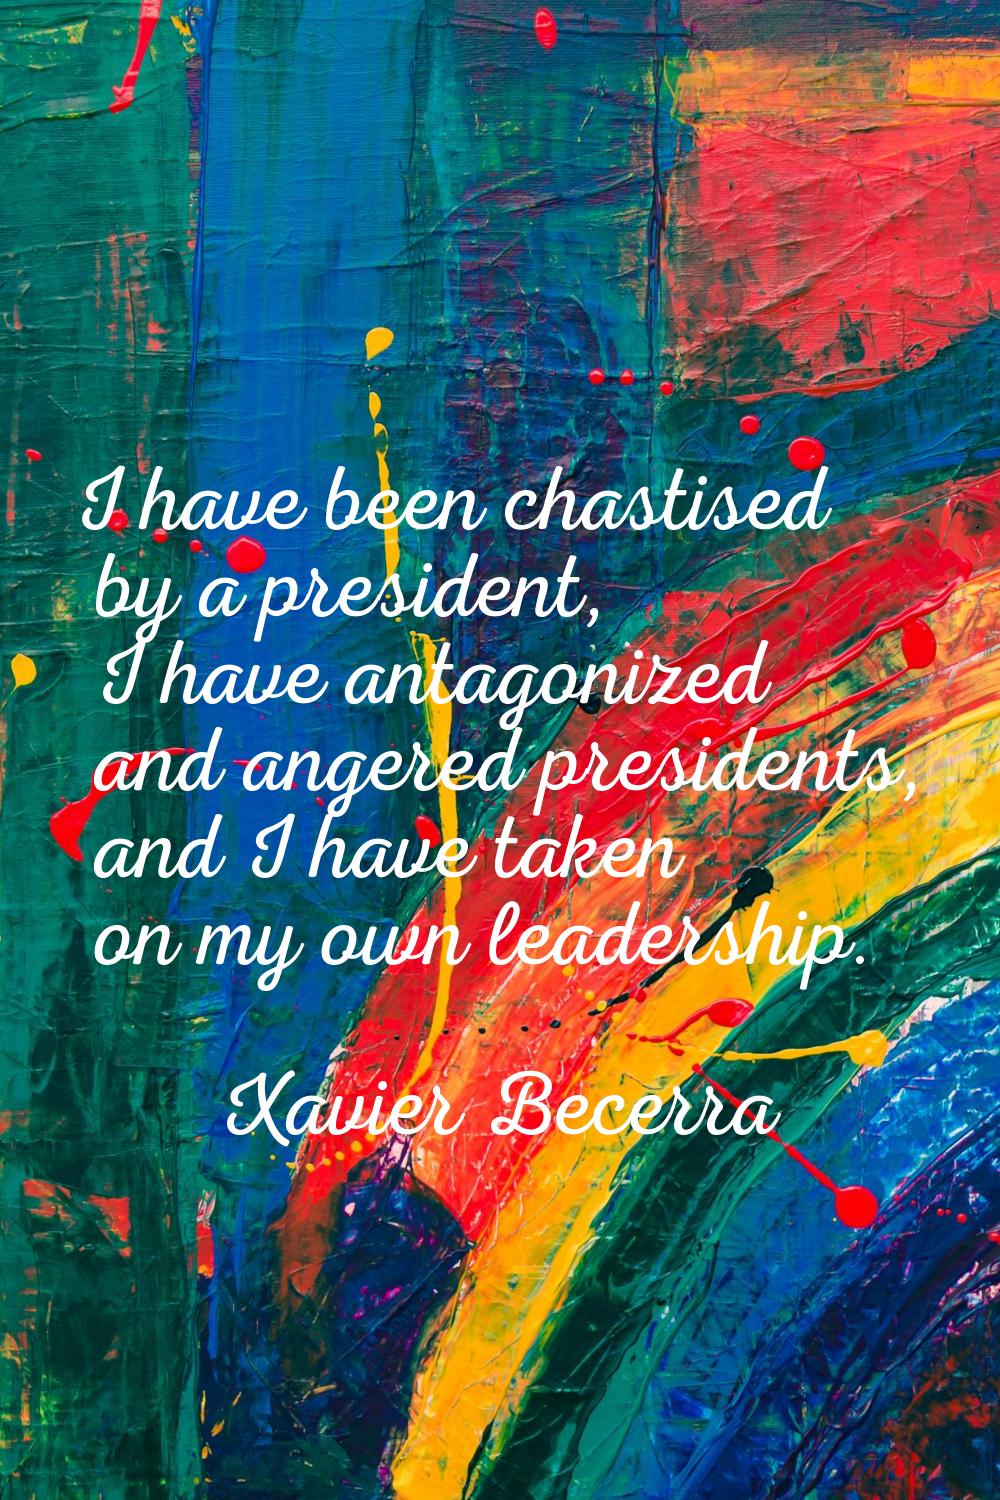 I have been chastised by a president, I have antagonized and angered presidents, and I have taken o